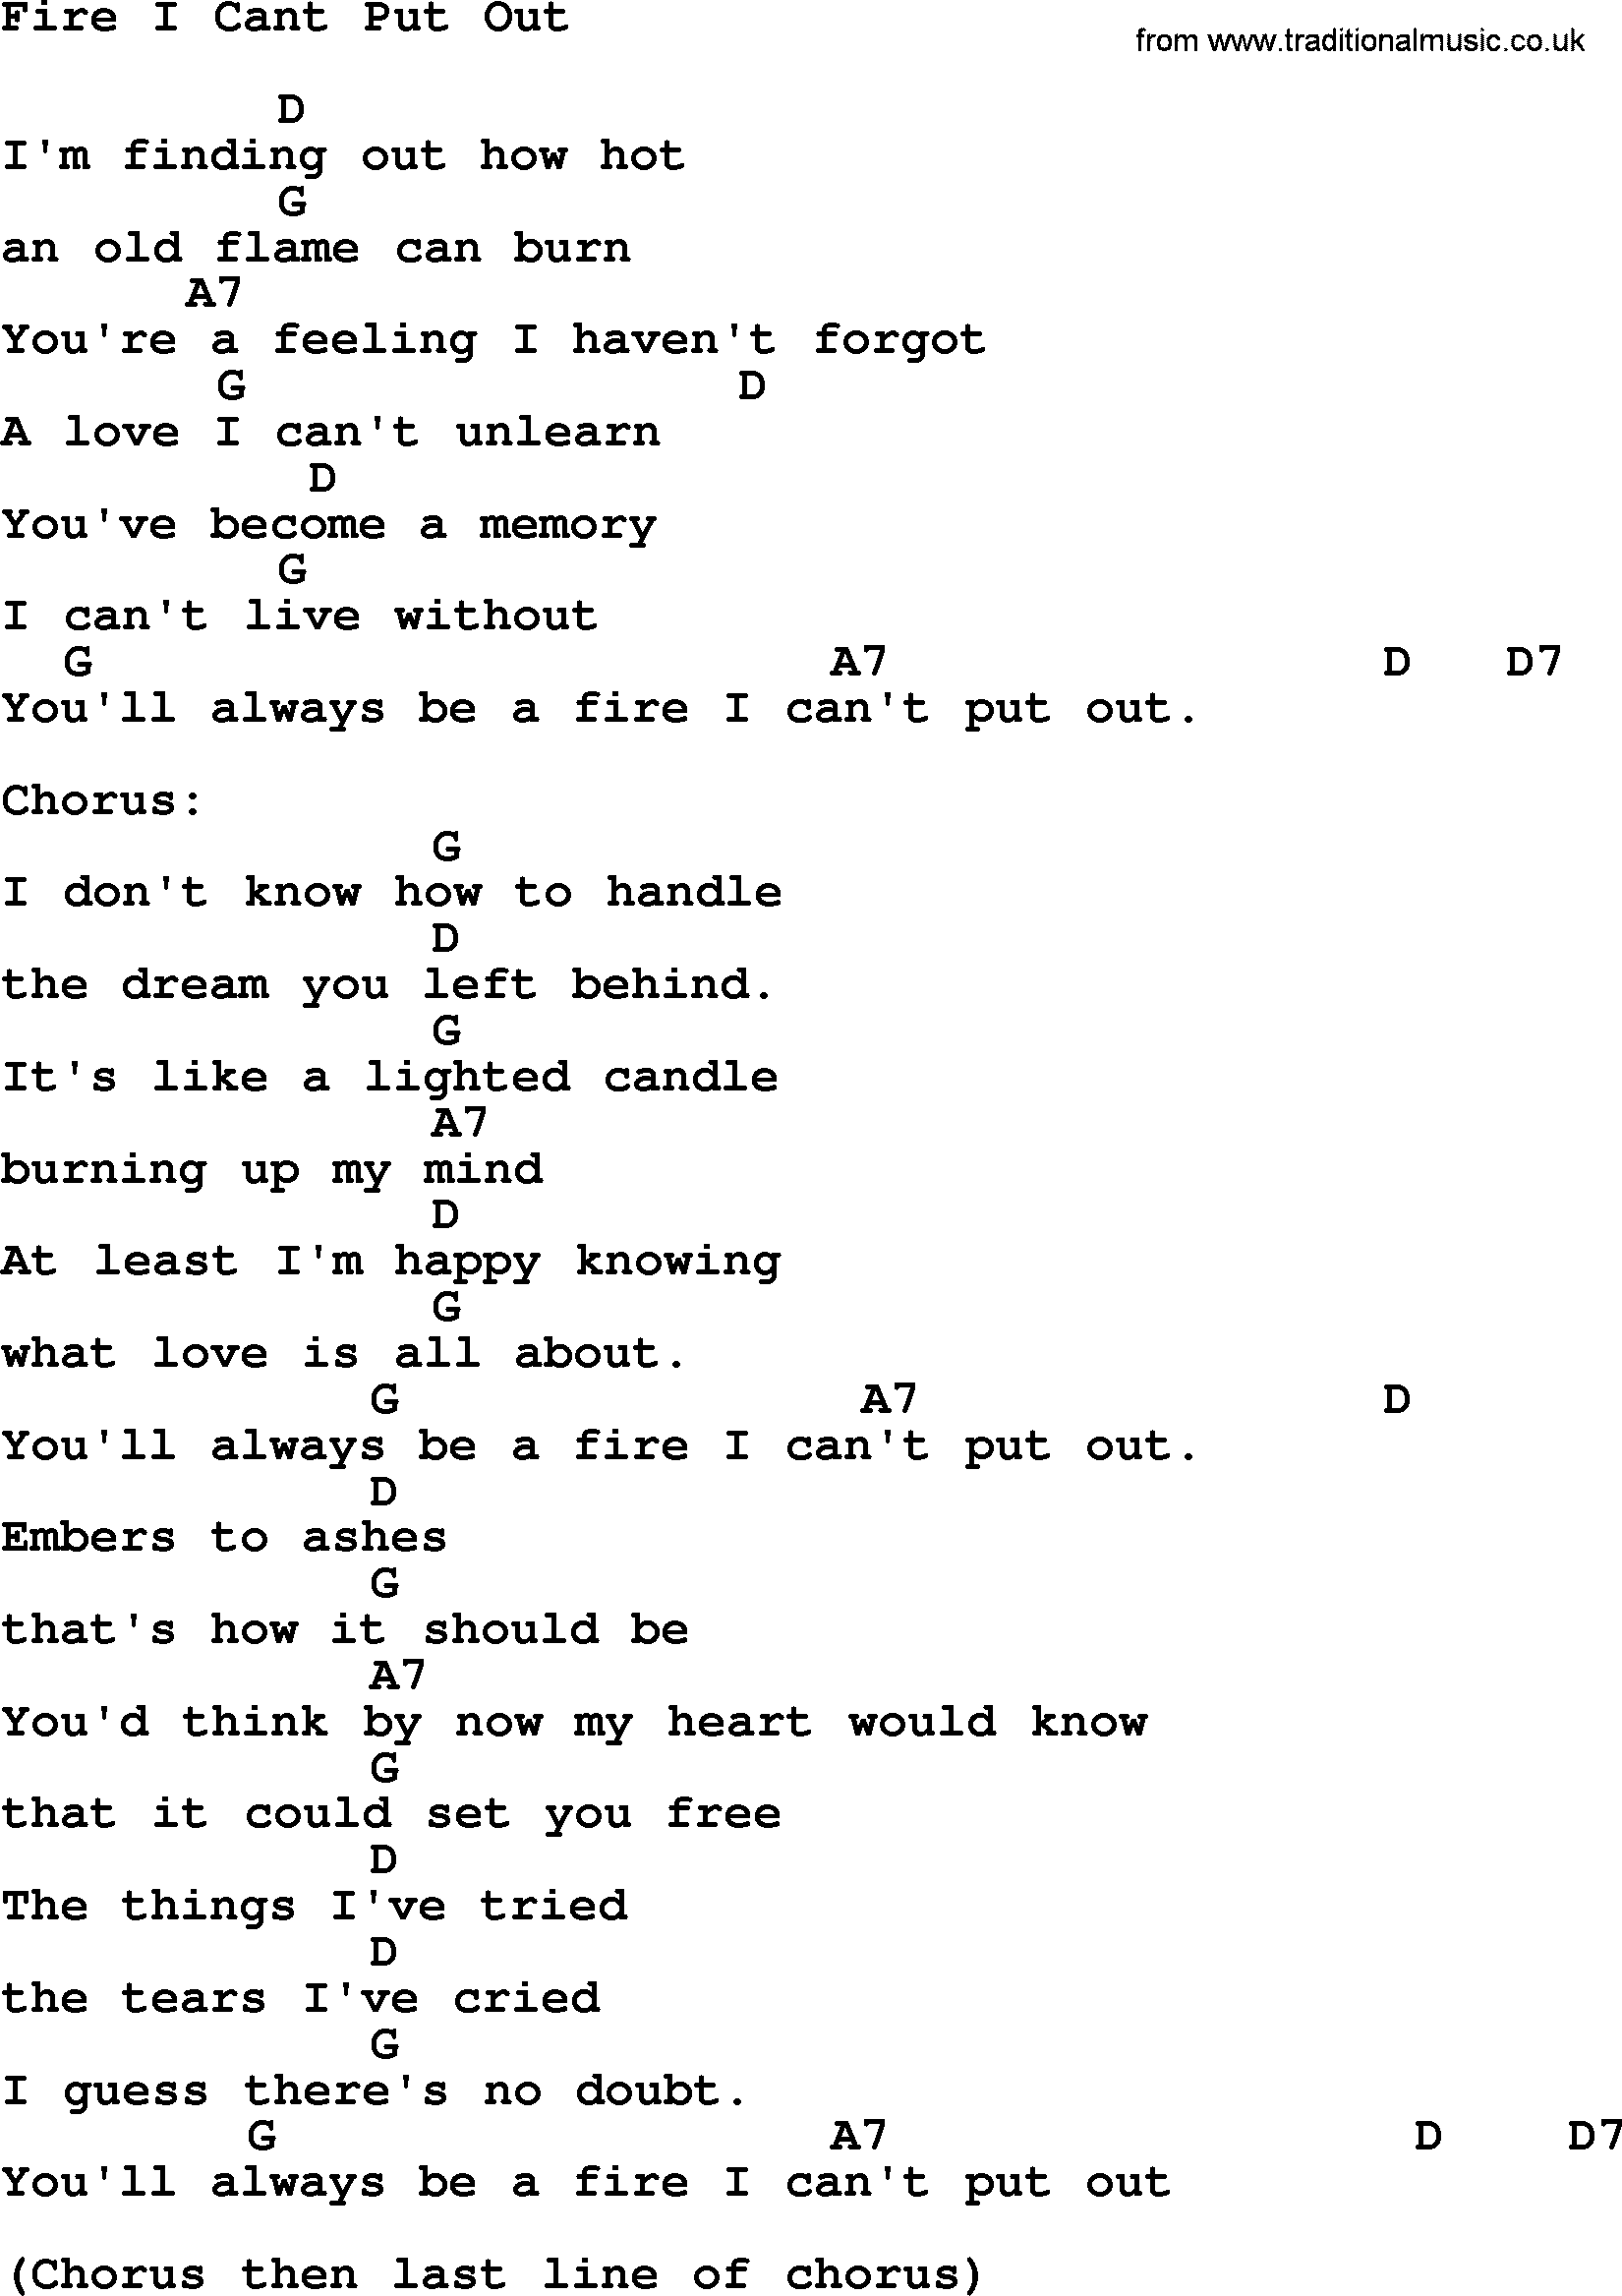 George Strait song: Fire I Cant Put Out, lyrics and chords